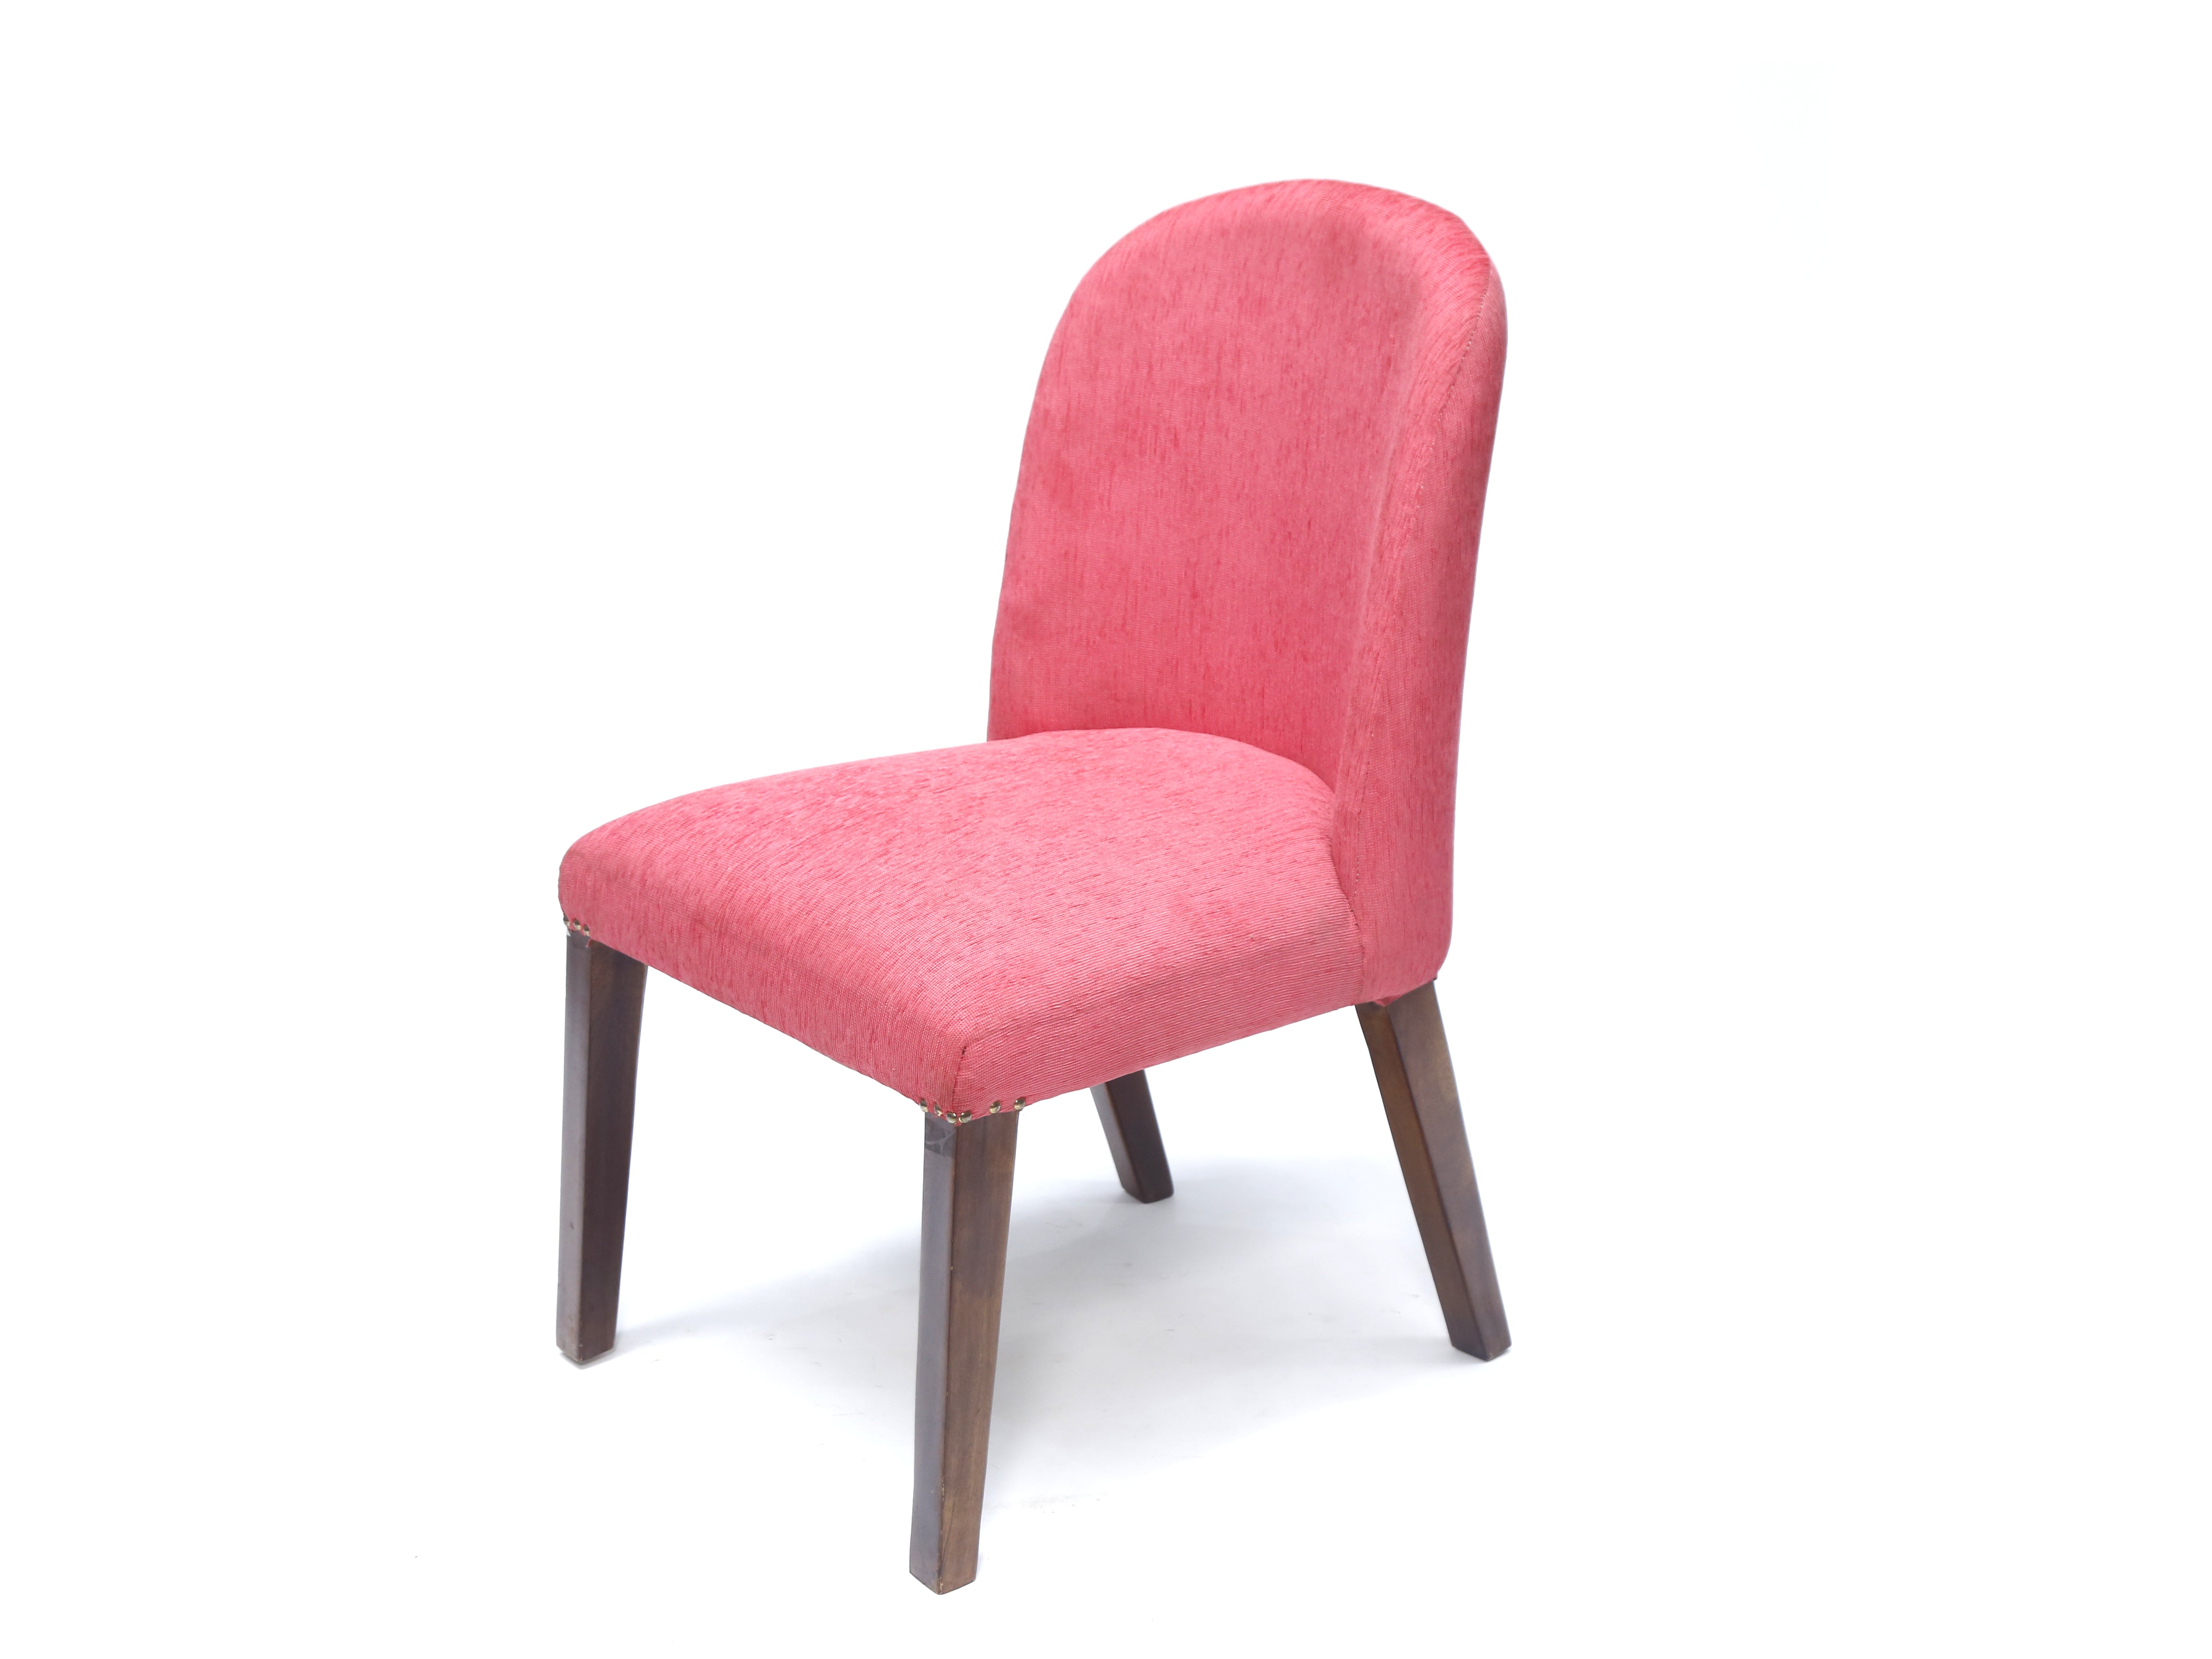 (Set of 2) Wood Stylish Pink Dinning office all purpose Chair Dining Chair